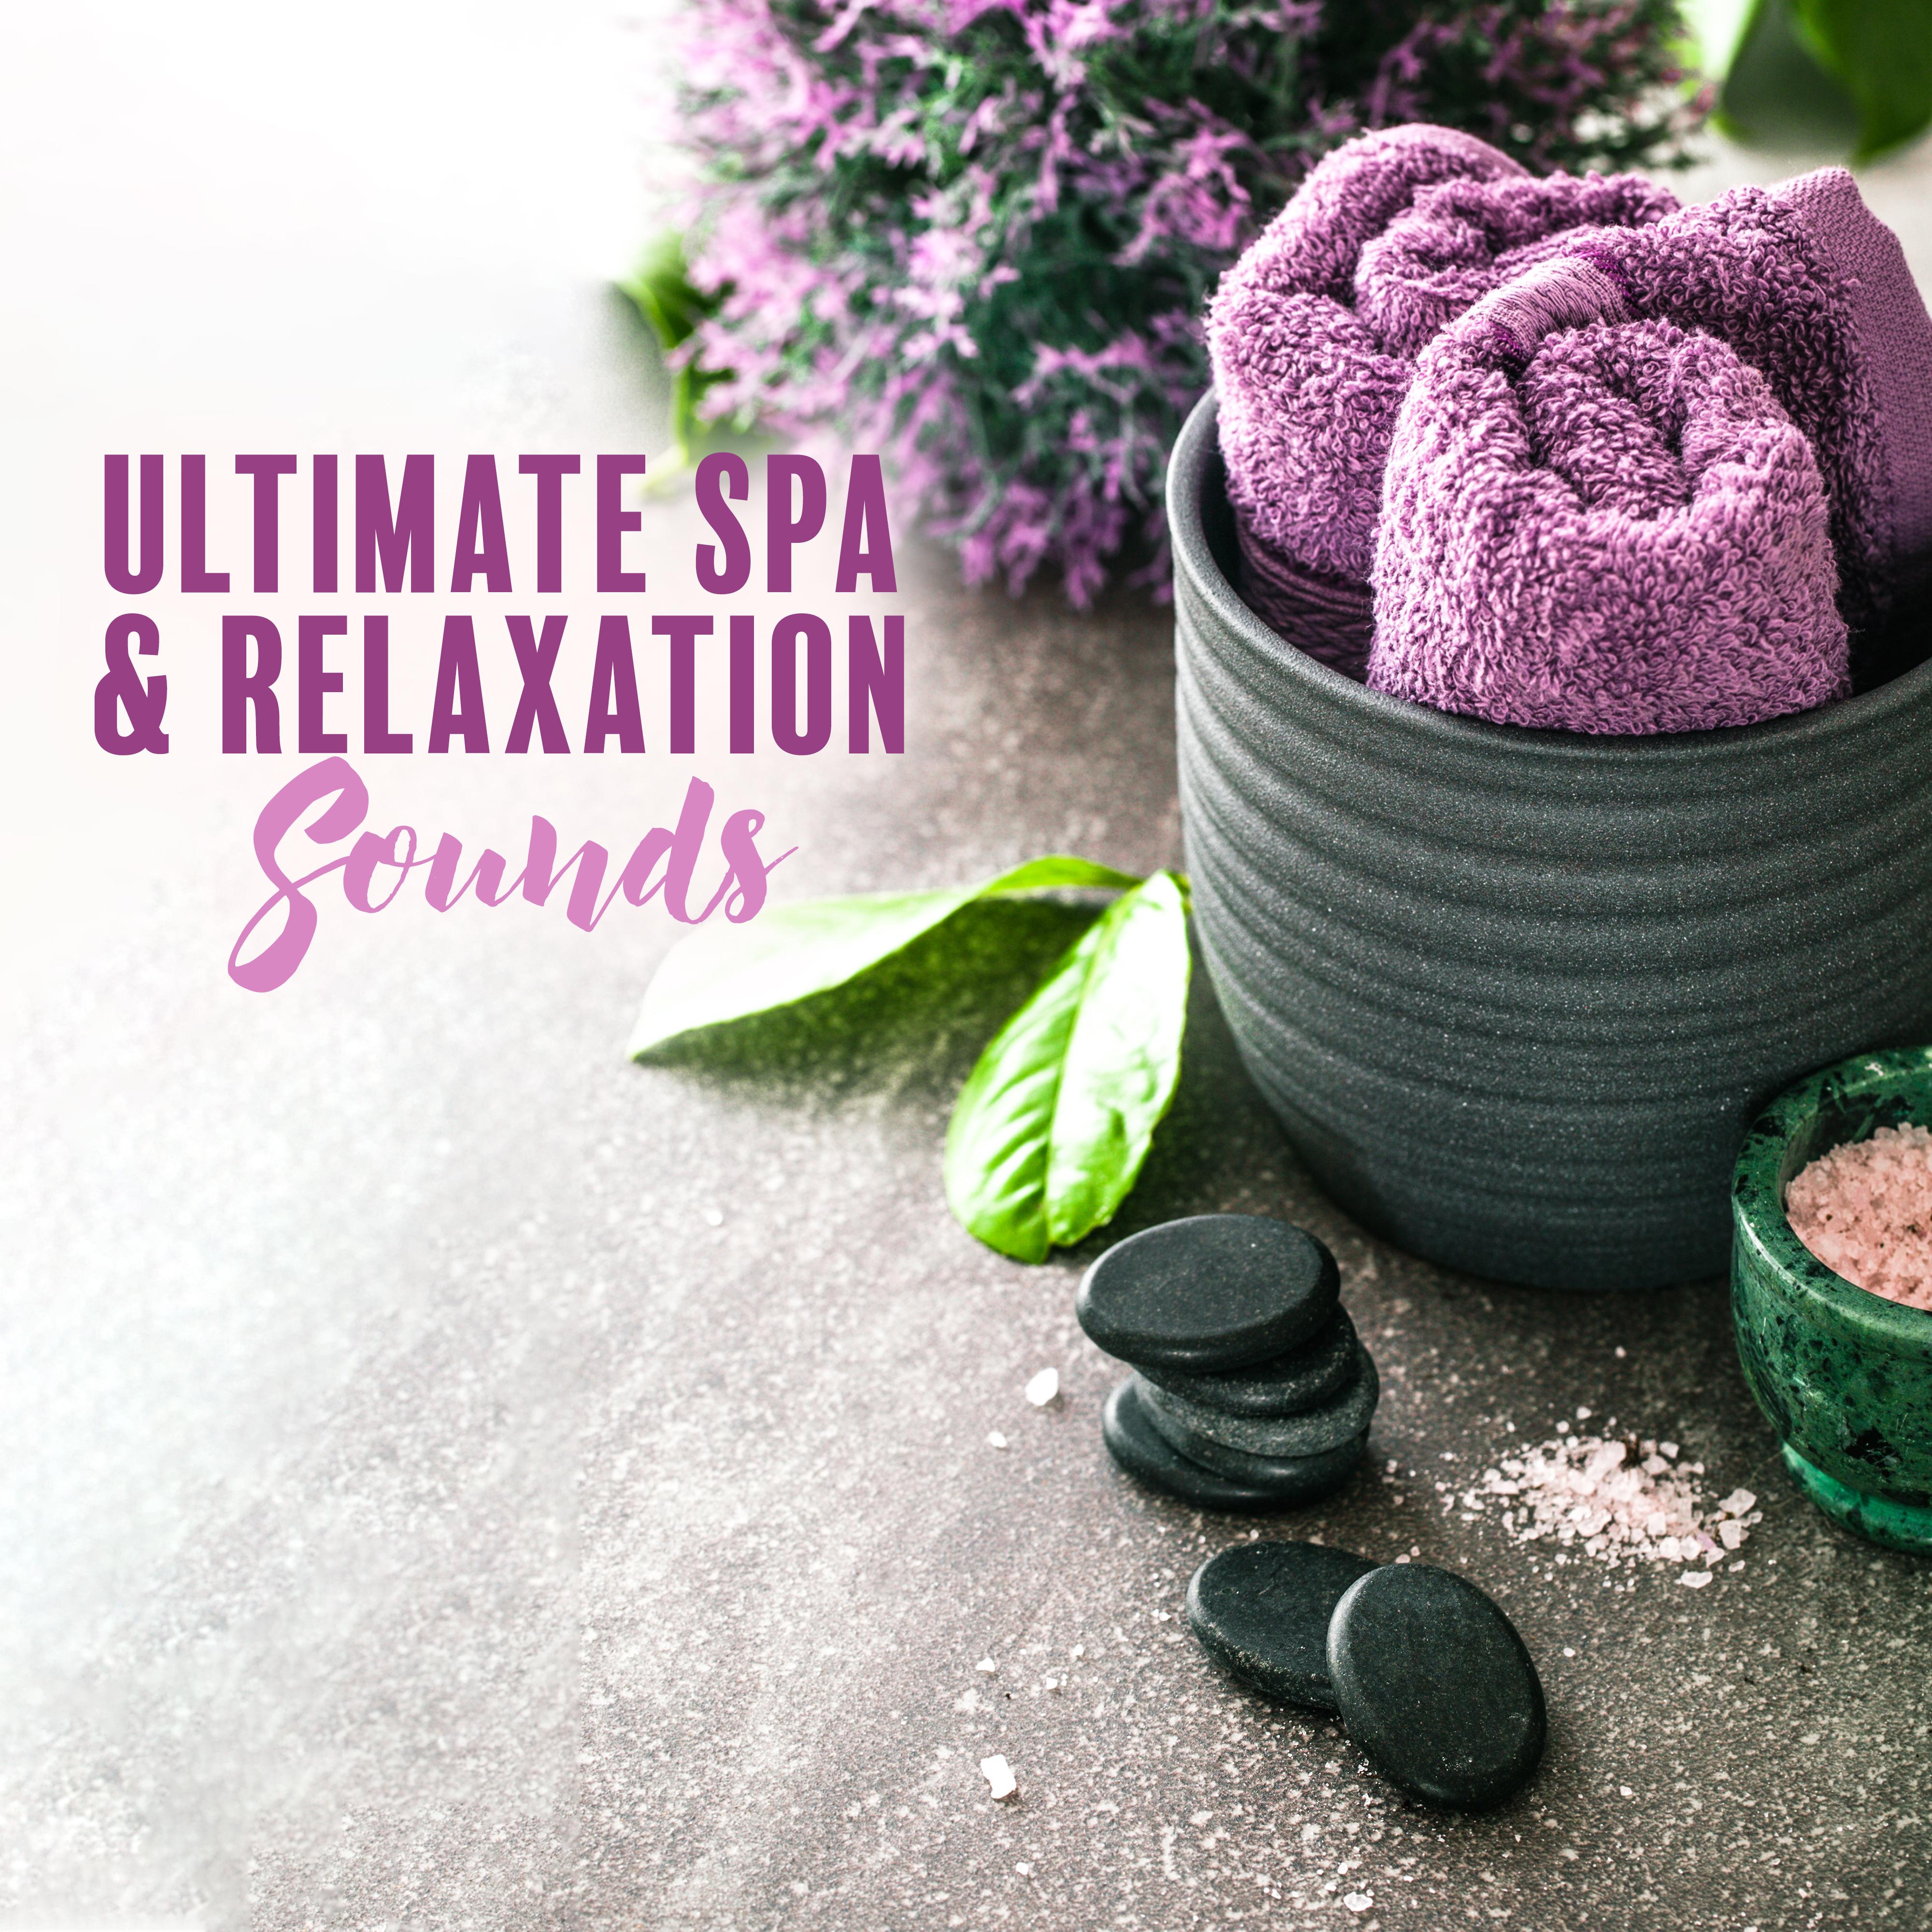 Ultimate Spa  Relaxation Sounds  New Age Music Compilation